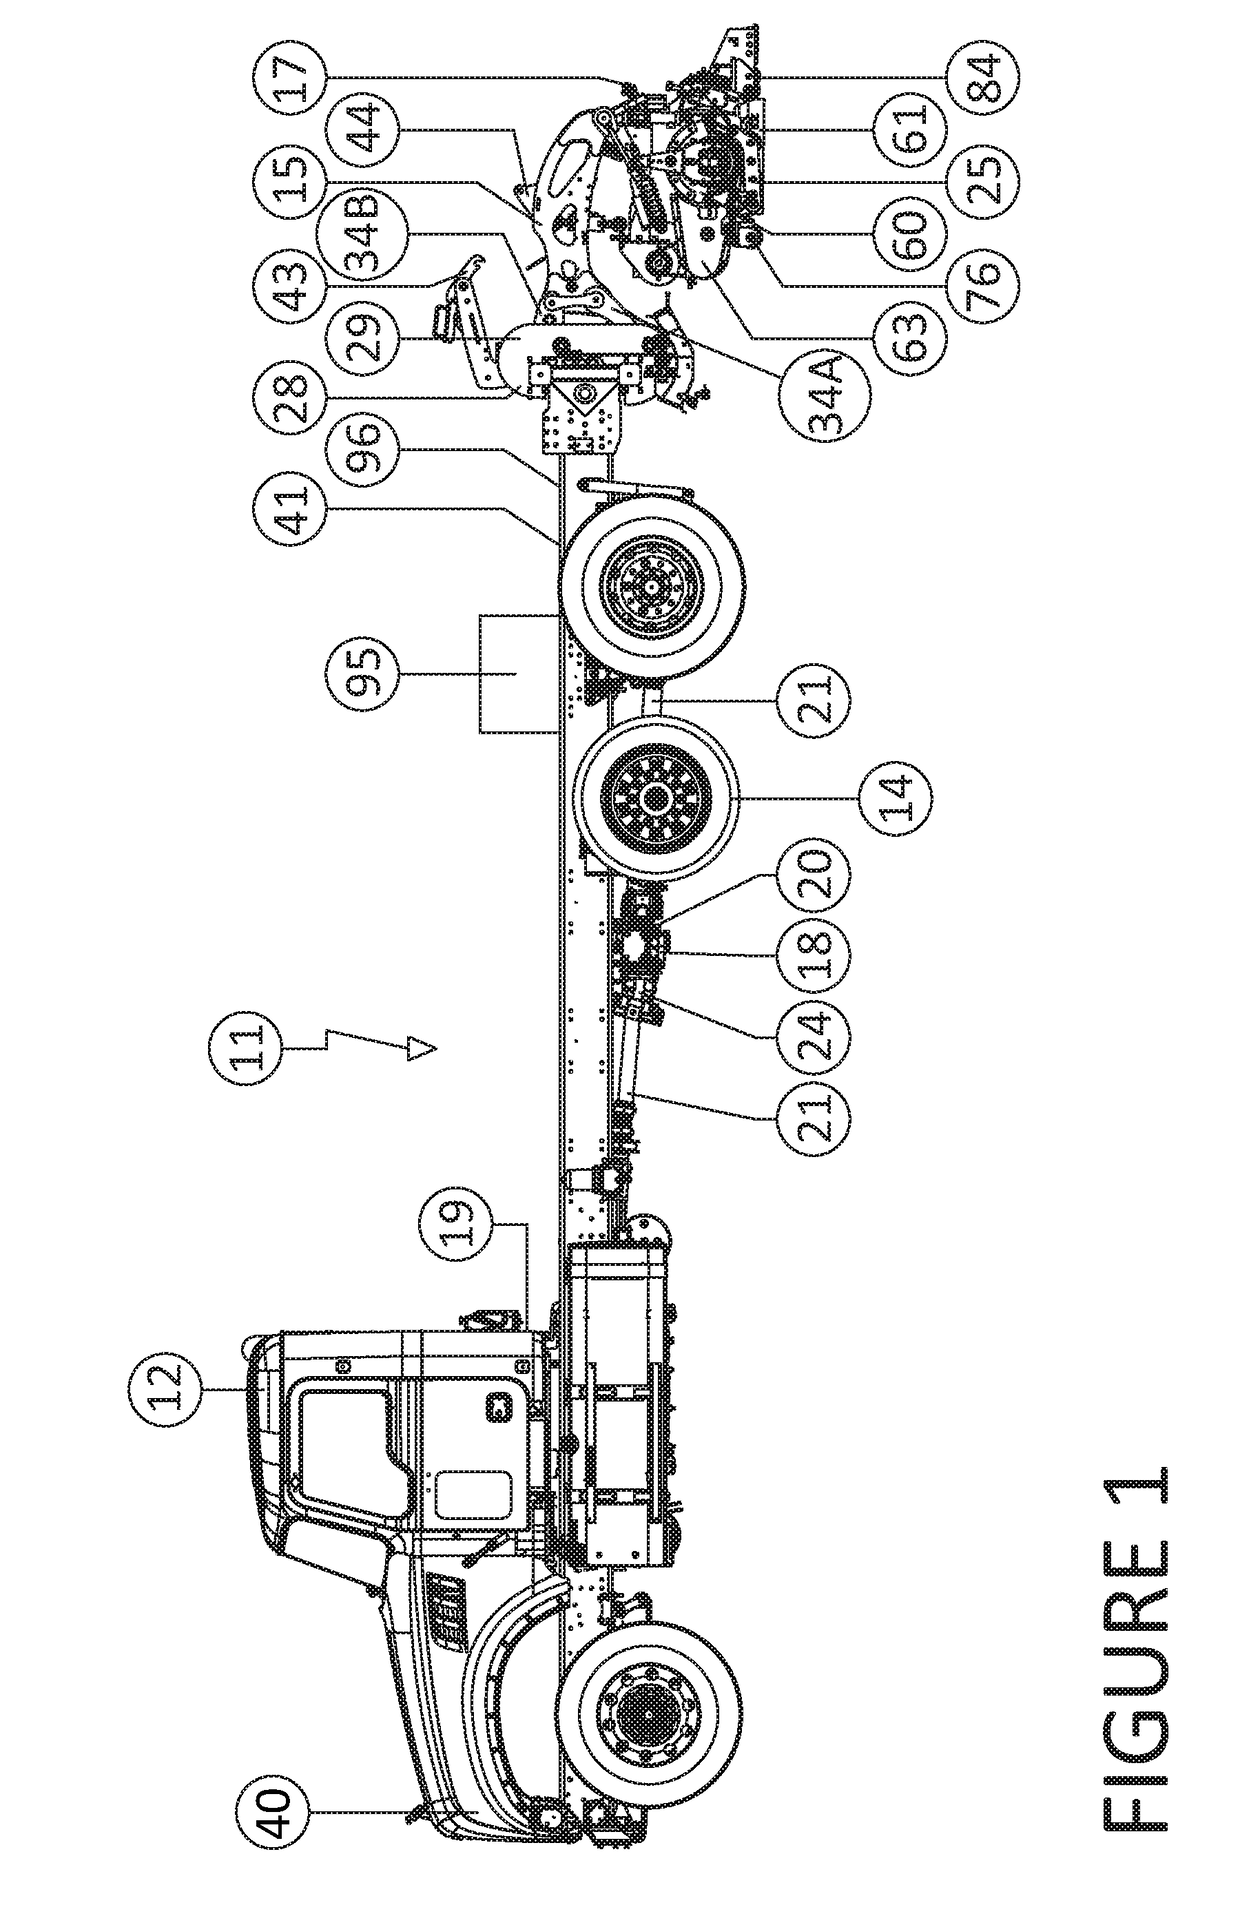 Rumble strip forming apparatus and method